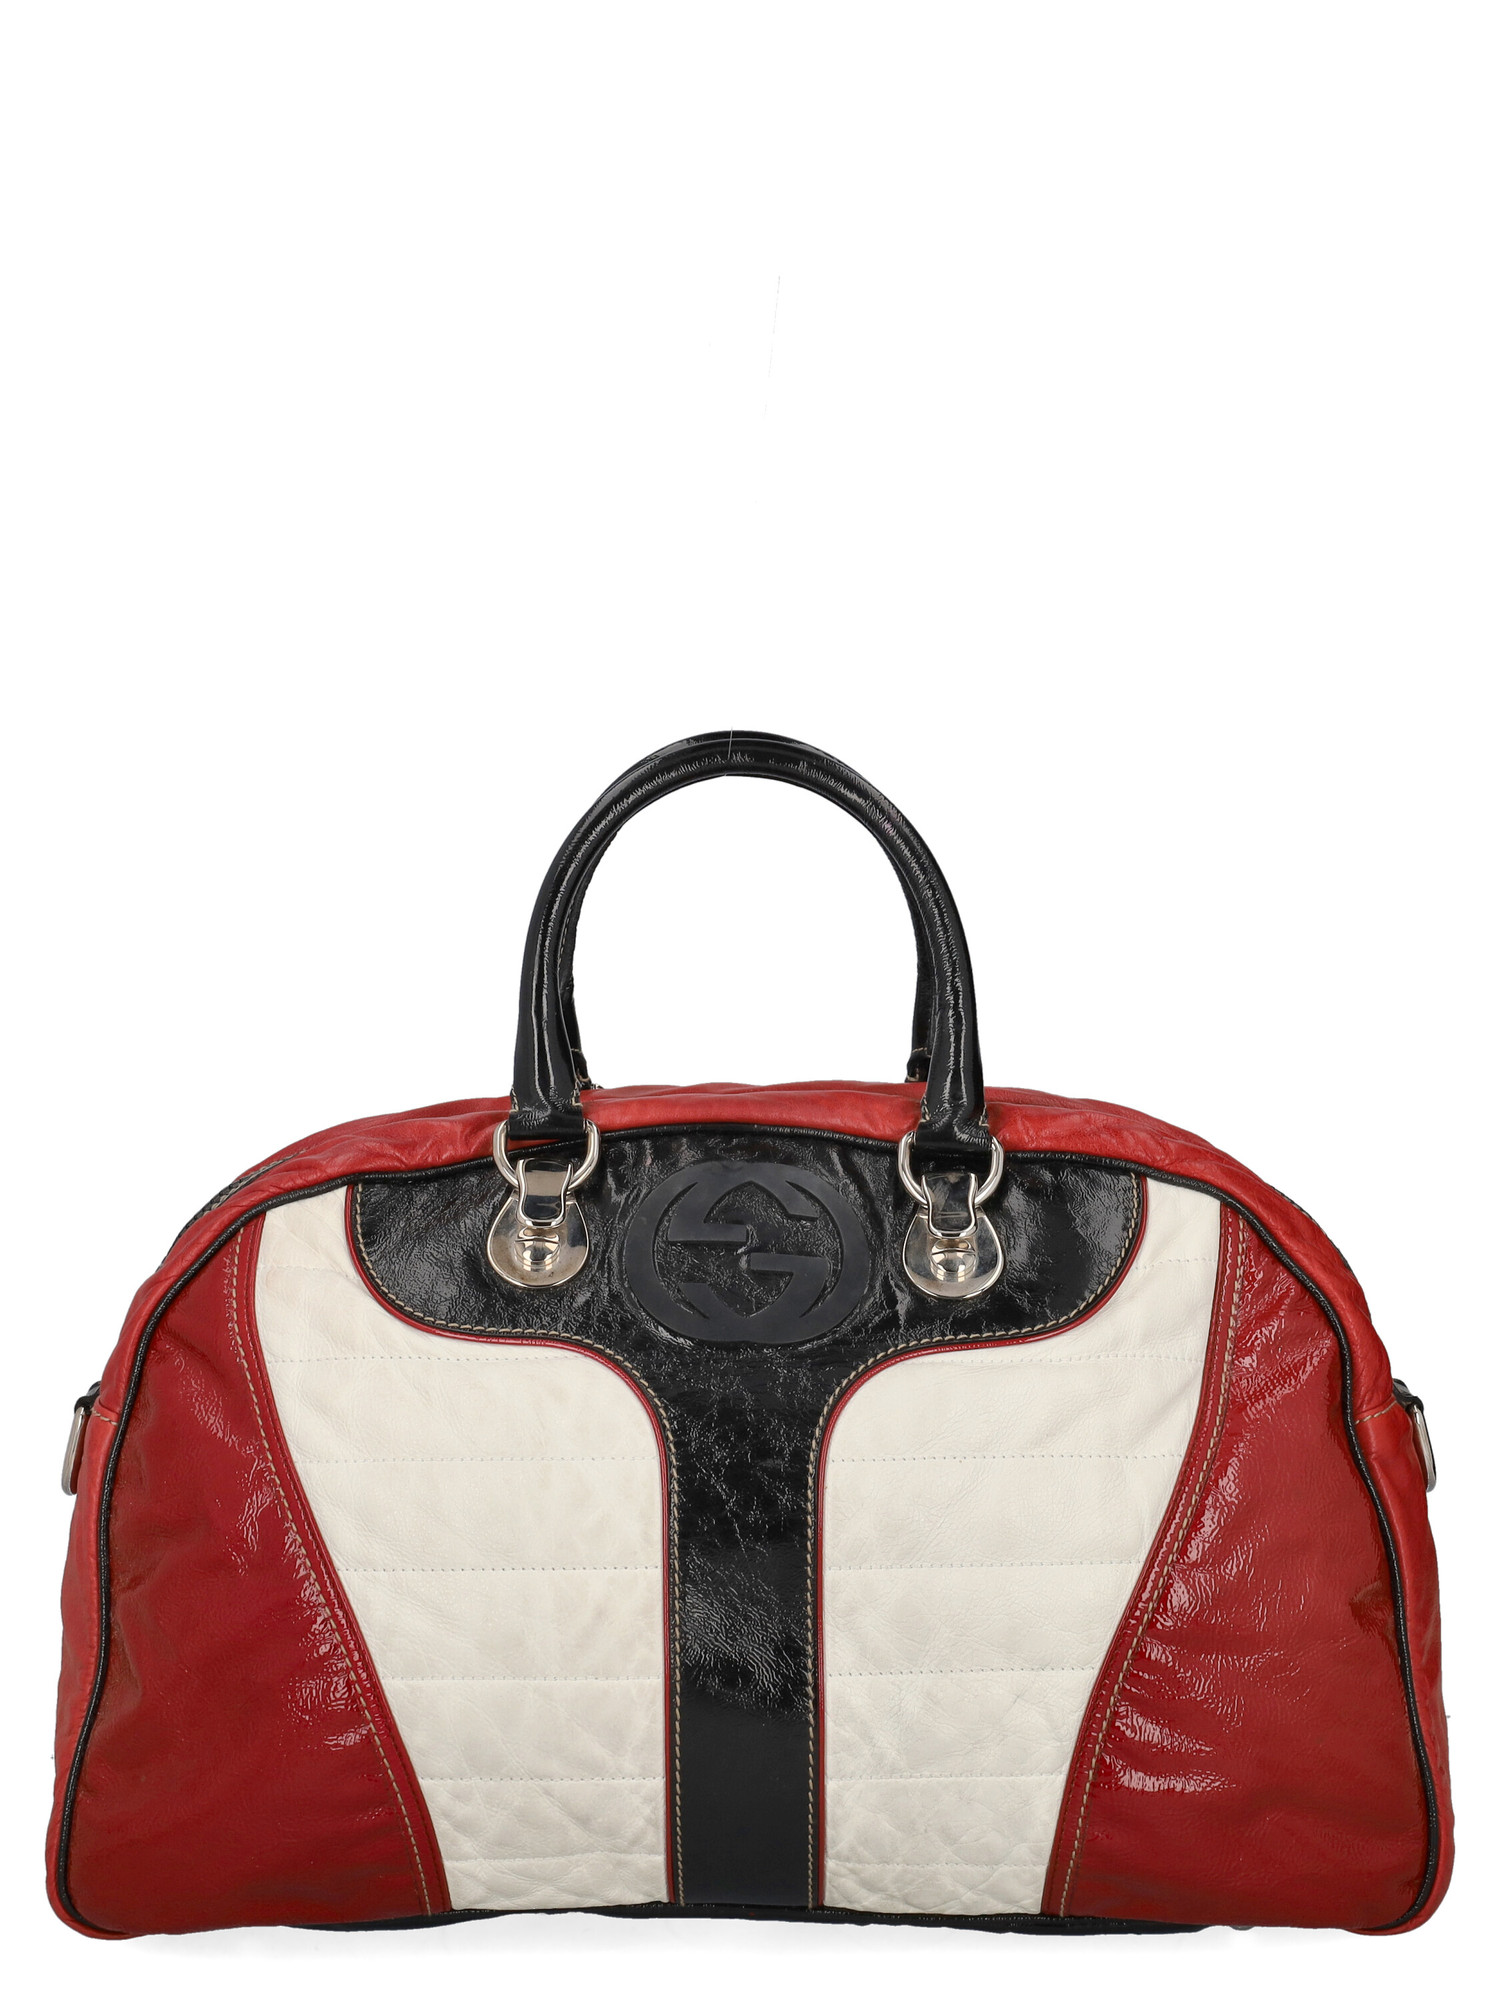 Condition: Good, Solid Color Leather, Color: Black, Red, White -  -  -